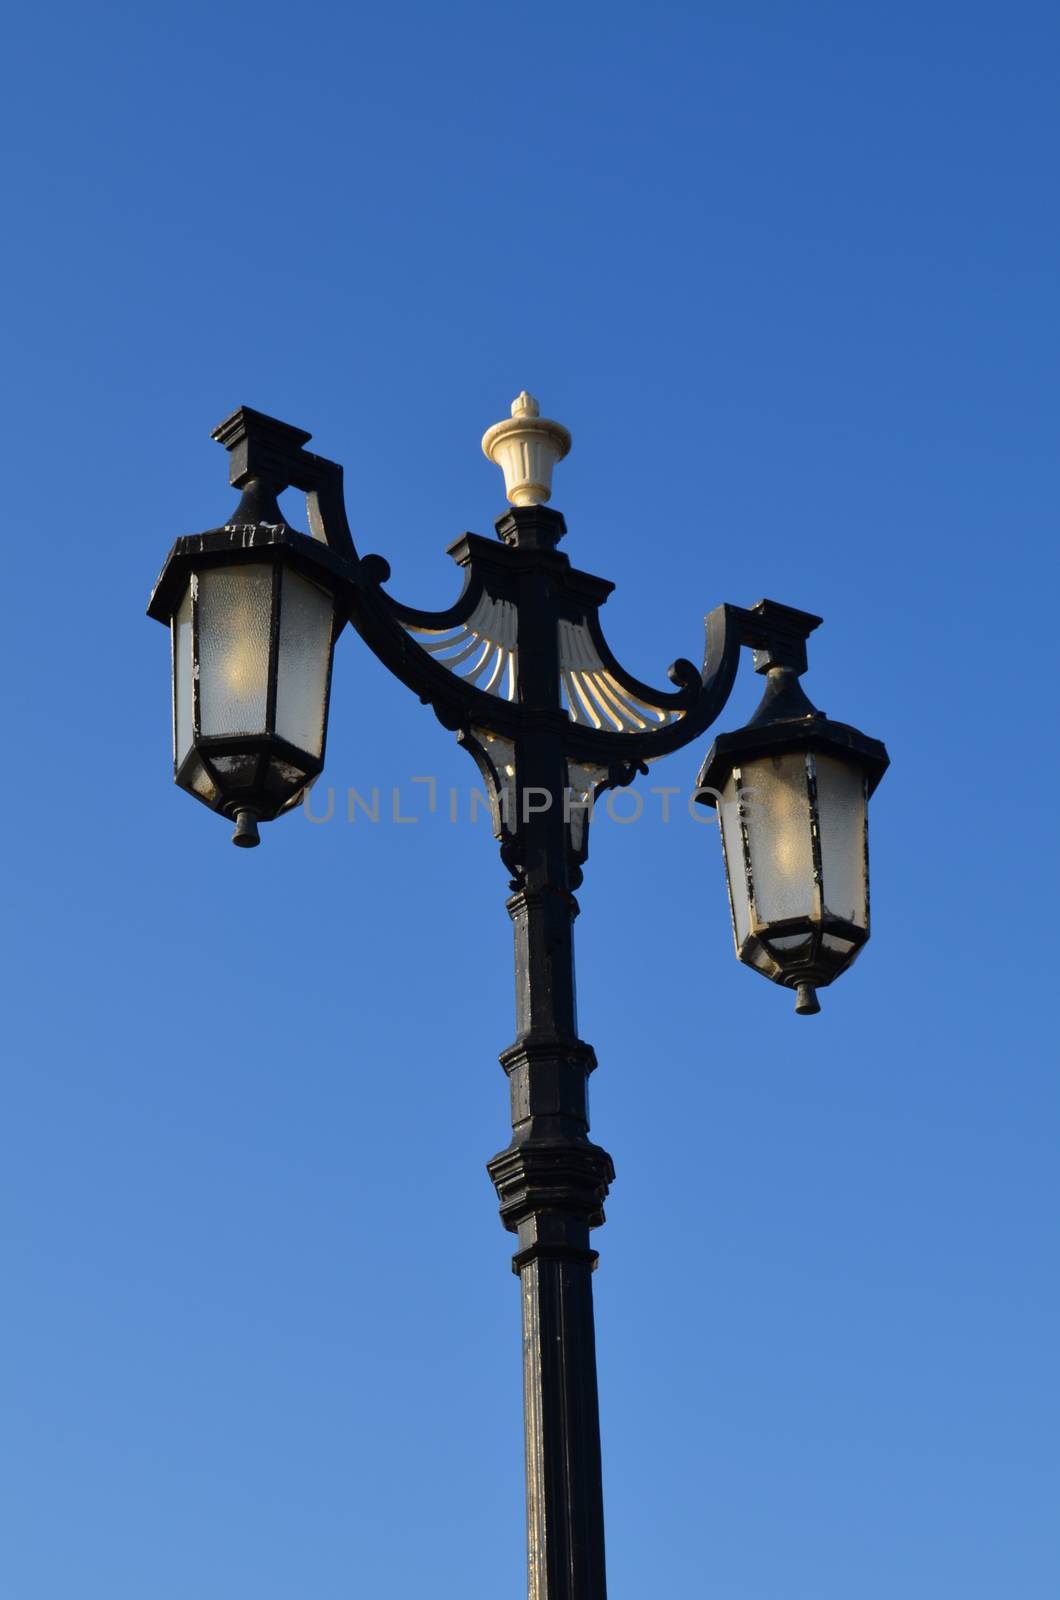 Ornate street lamp. by bunsview